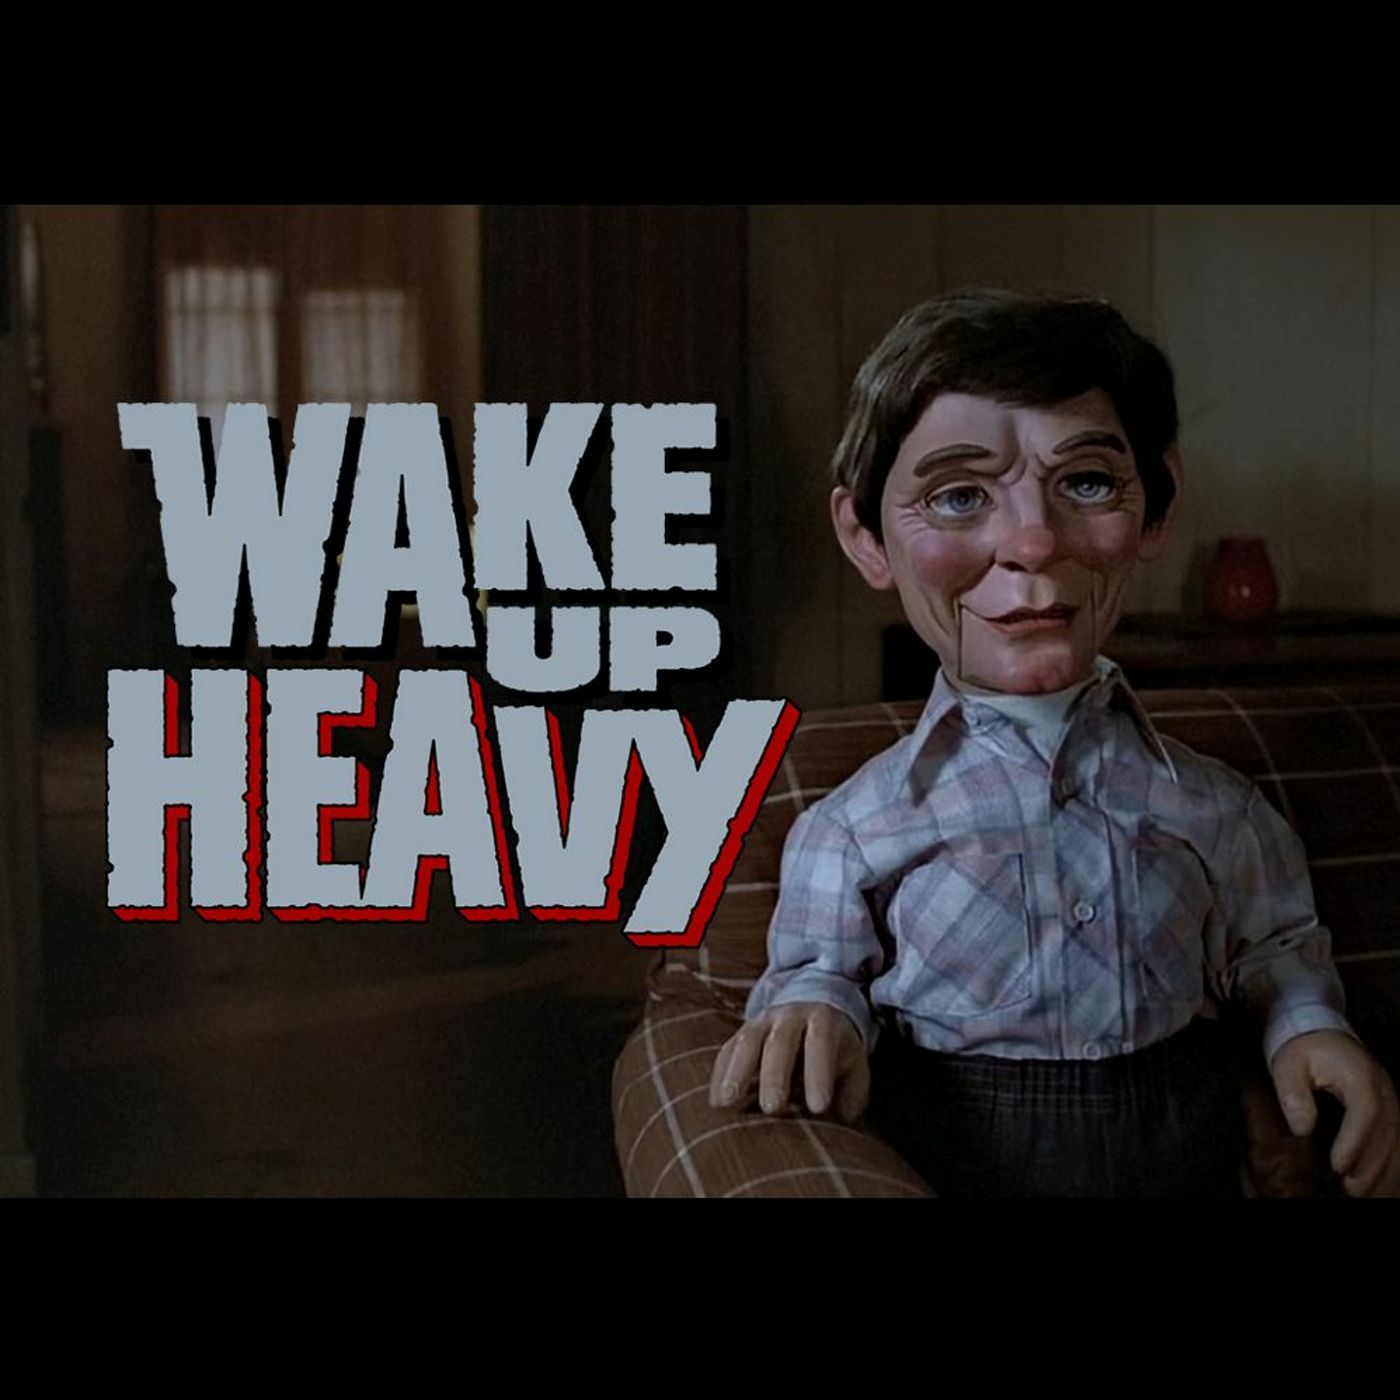 Welcome to Wake Up Heavy